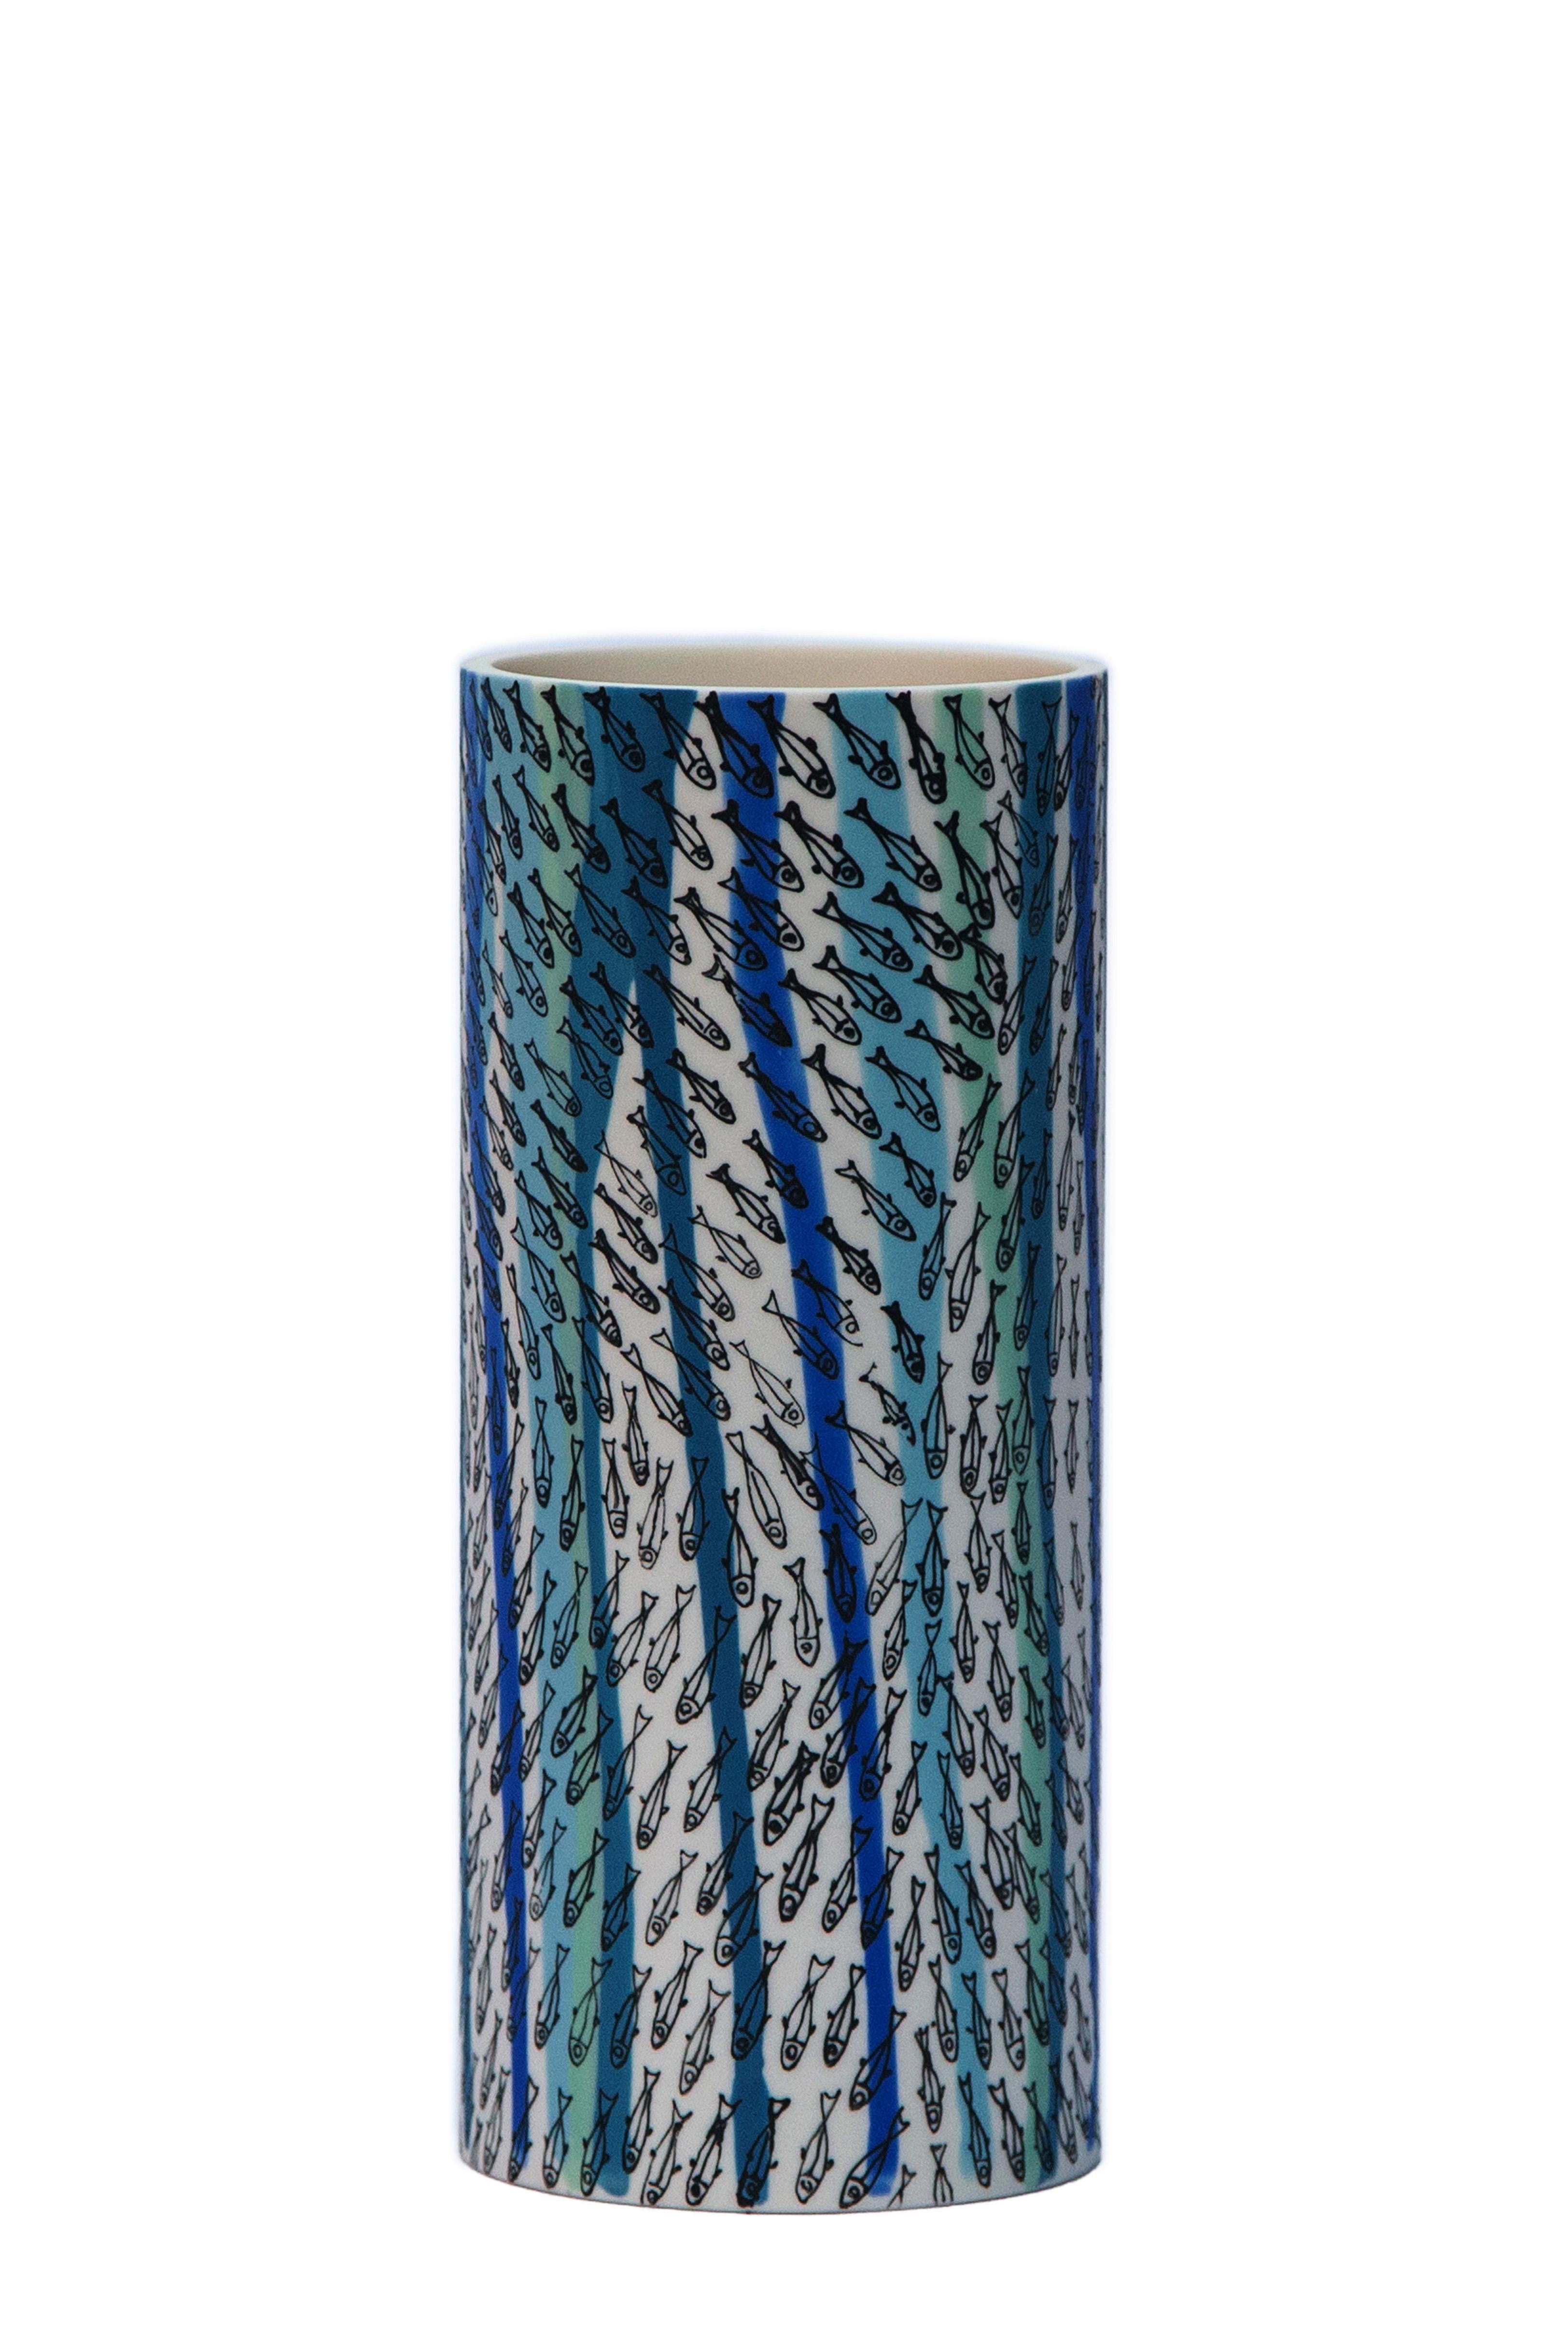 “Shoal of fish”, 2021 Porcelain vase by Eugenio Michelini - Parian ware, dripping stained slips, hand decorated with overglaze. Size = 8.5 x 19.5cm H
Unique piece handmade - 2 firings 

The focus of Eugenio Michelini (Italy, 1970) interest lies